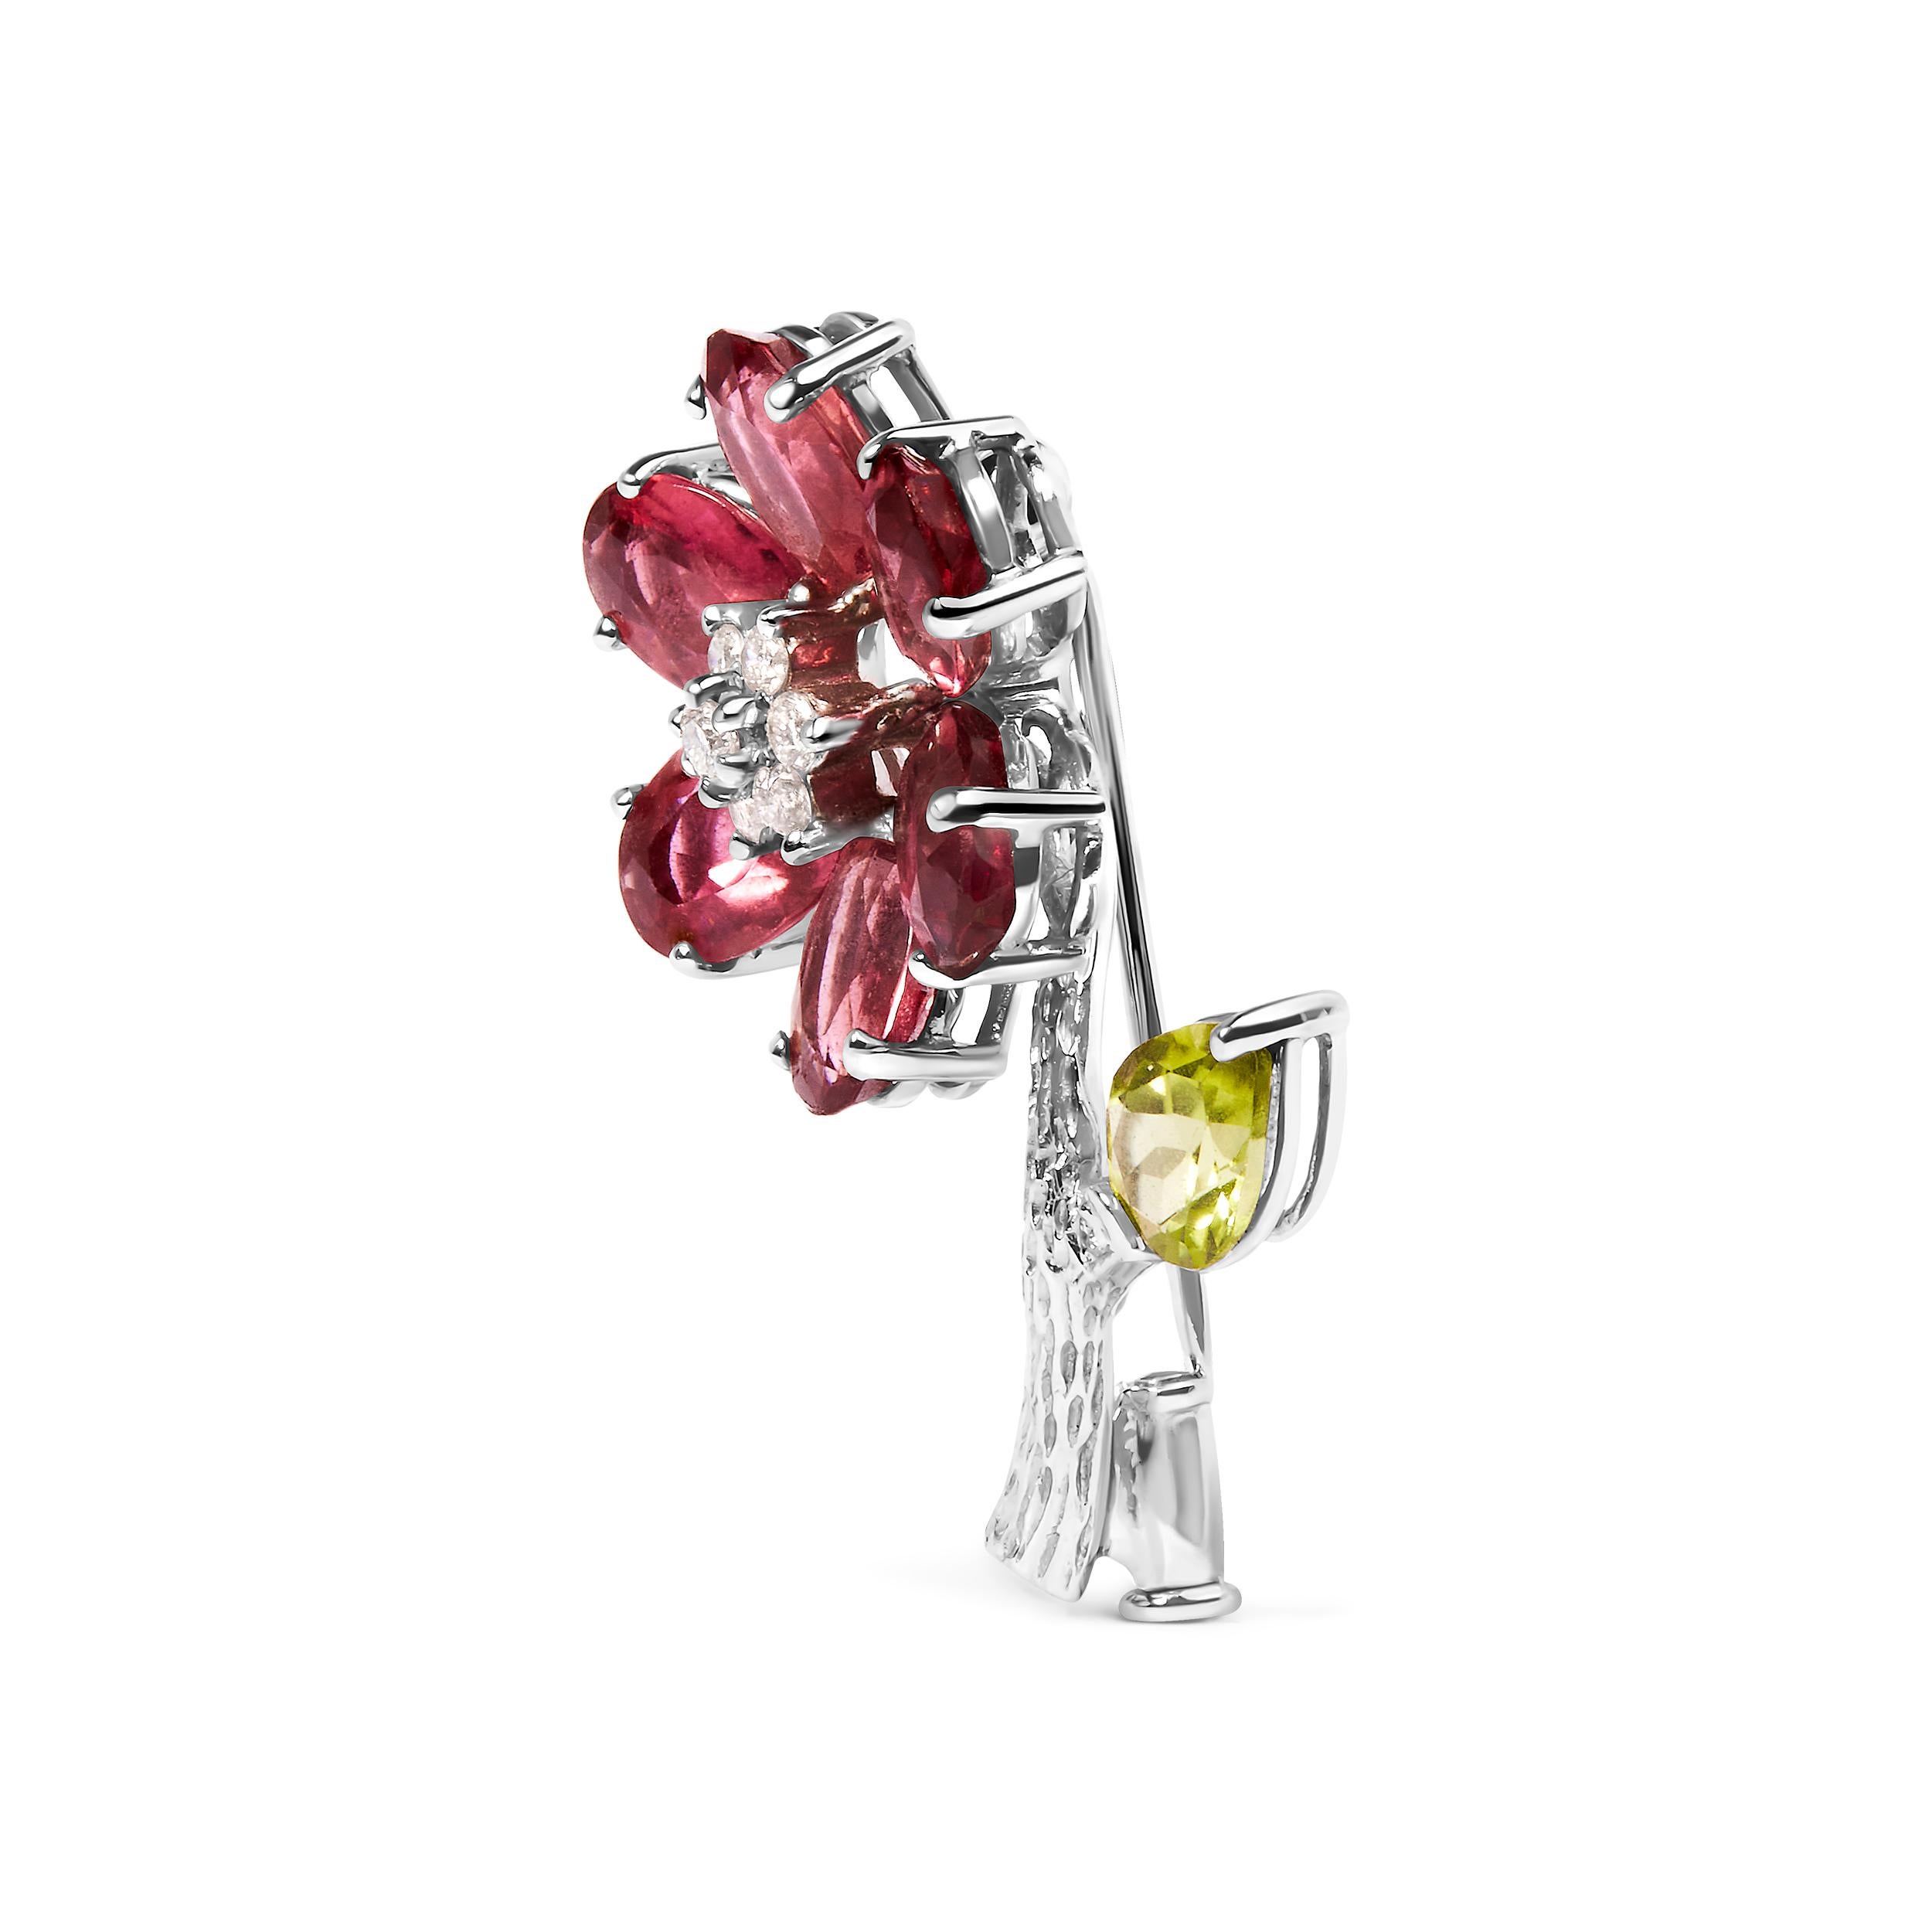 Crafted to perfection, this brooch pin is a stunning portrayal of a lifelike flower. The stem, fashioned from gleaming 18k white gold, is adorned with a radiant array of white diamonds, providing an unmatched brilliance that mimics the glistening